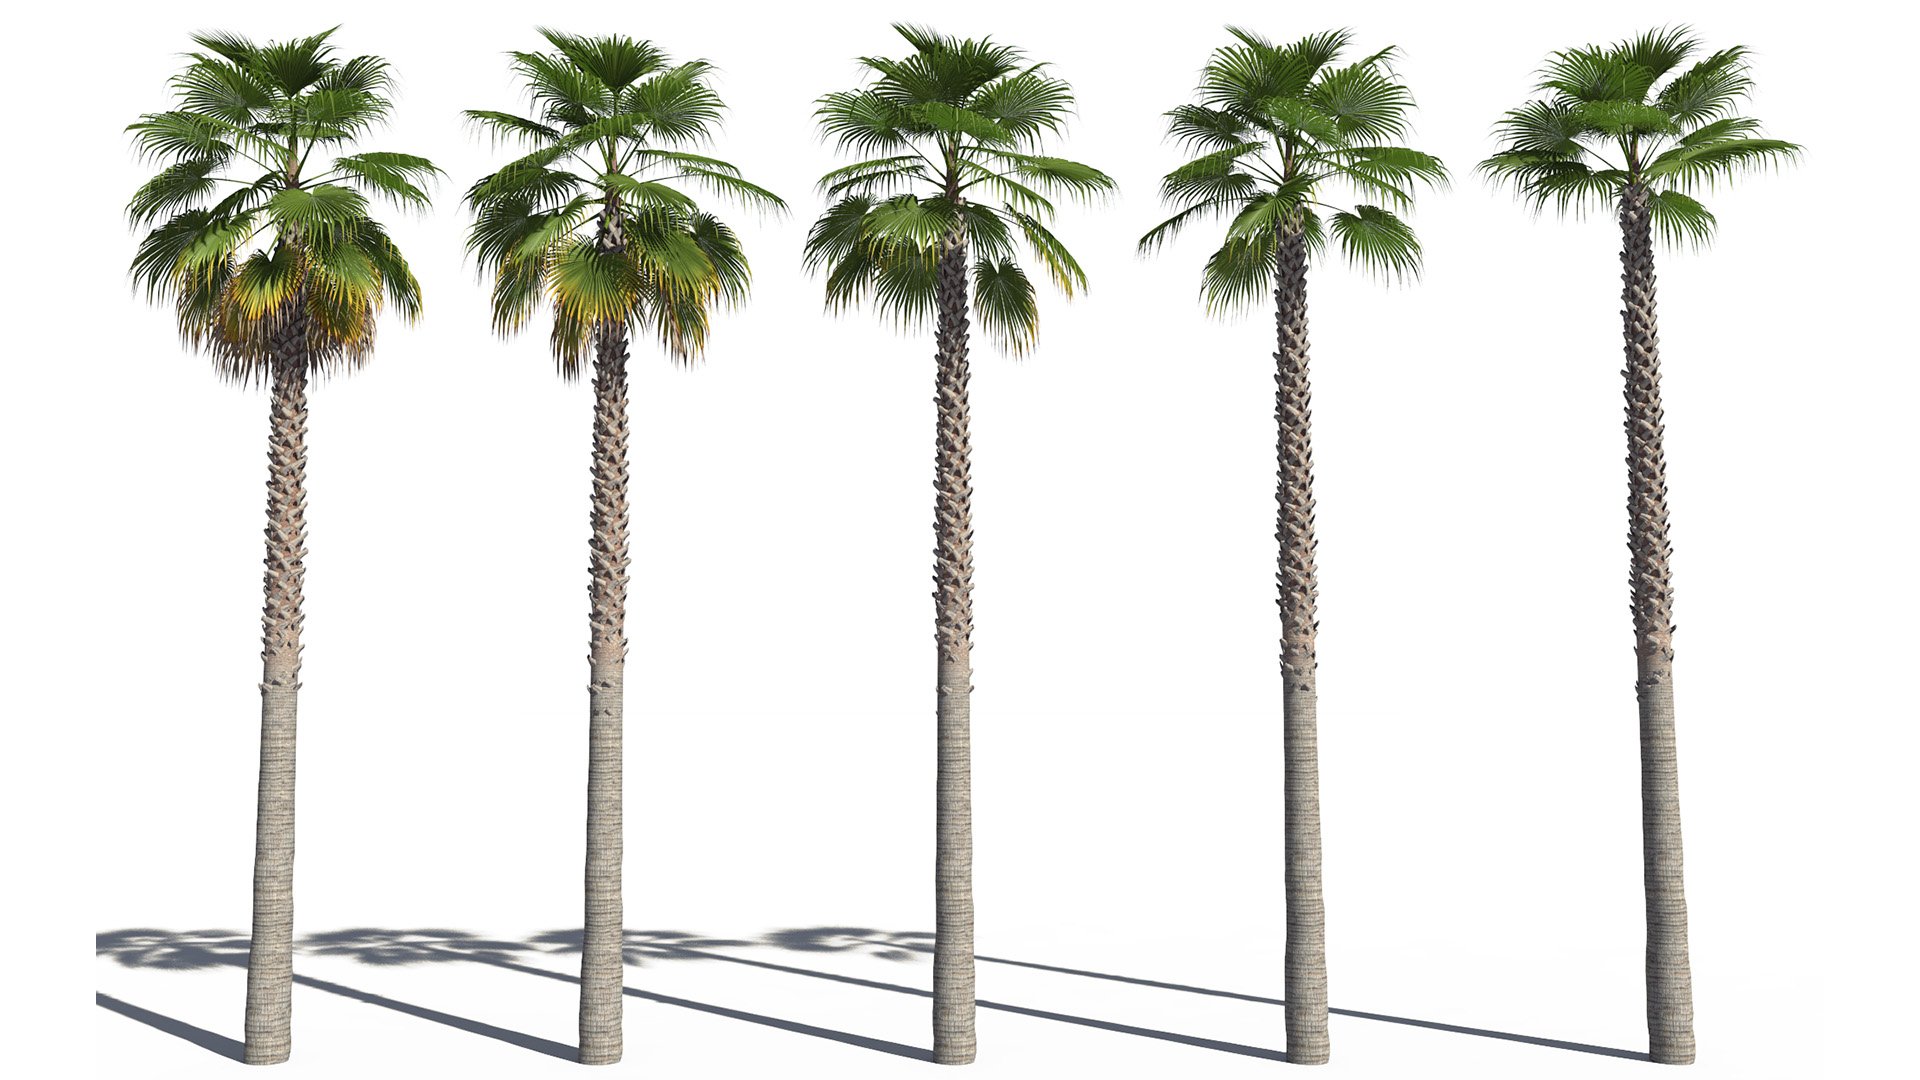 3D model of the Mexican fan palm Washingtonia robusta